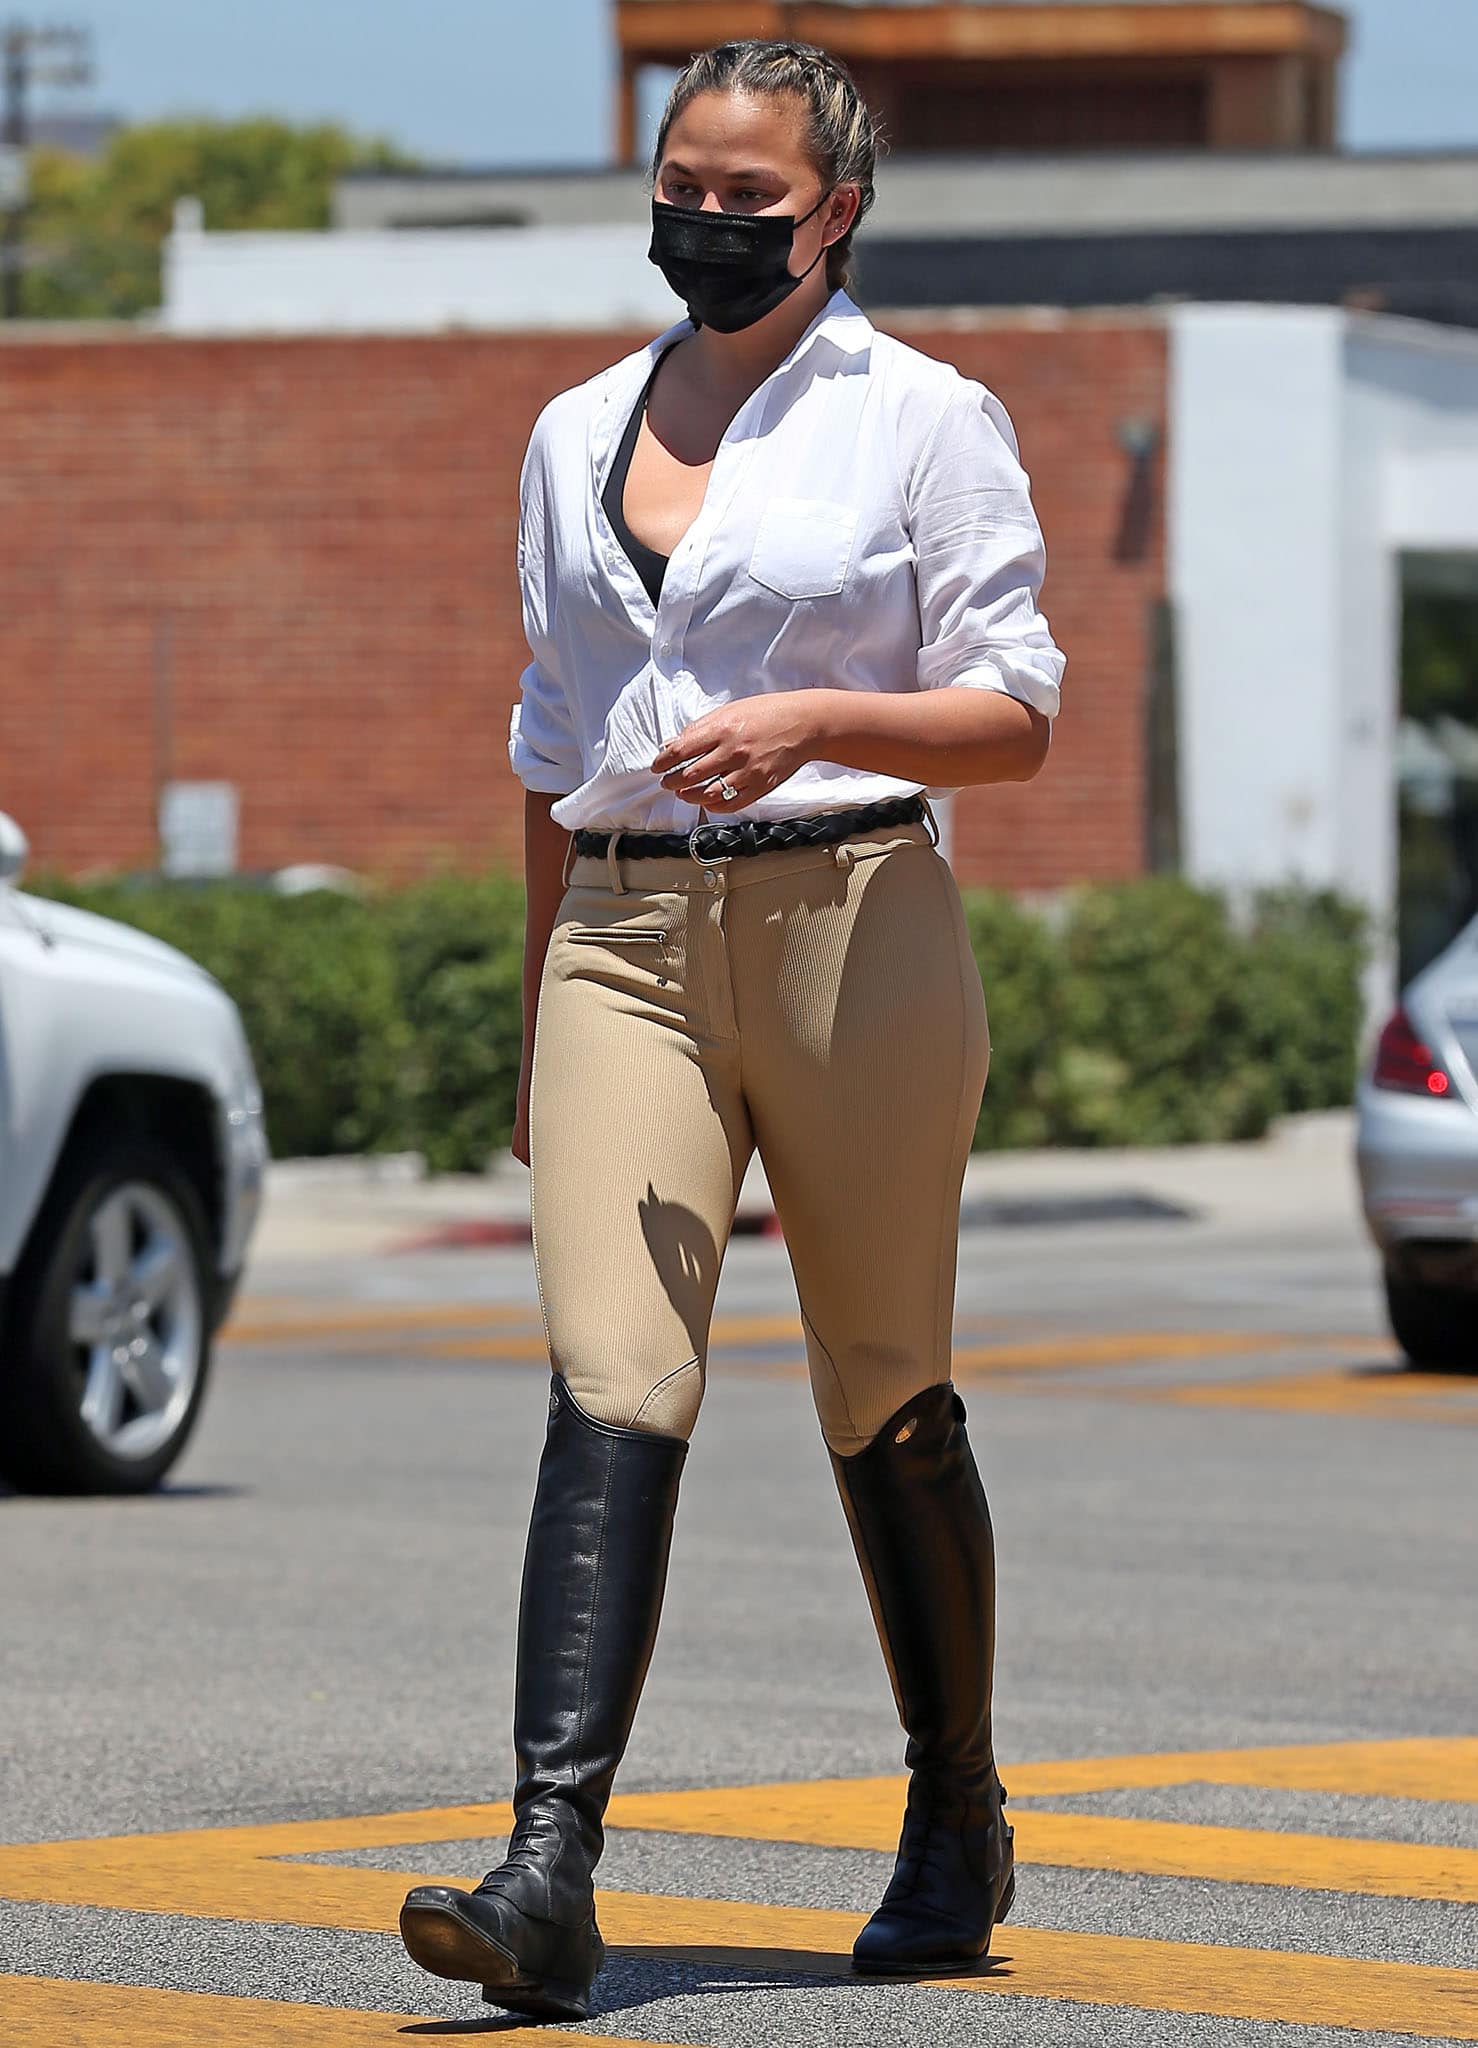 Chrissy Teigen opts for an equestrian-inspired outfit with Frank & Eileen white shirt, Tuffrider pants, and Isabel Marant belt